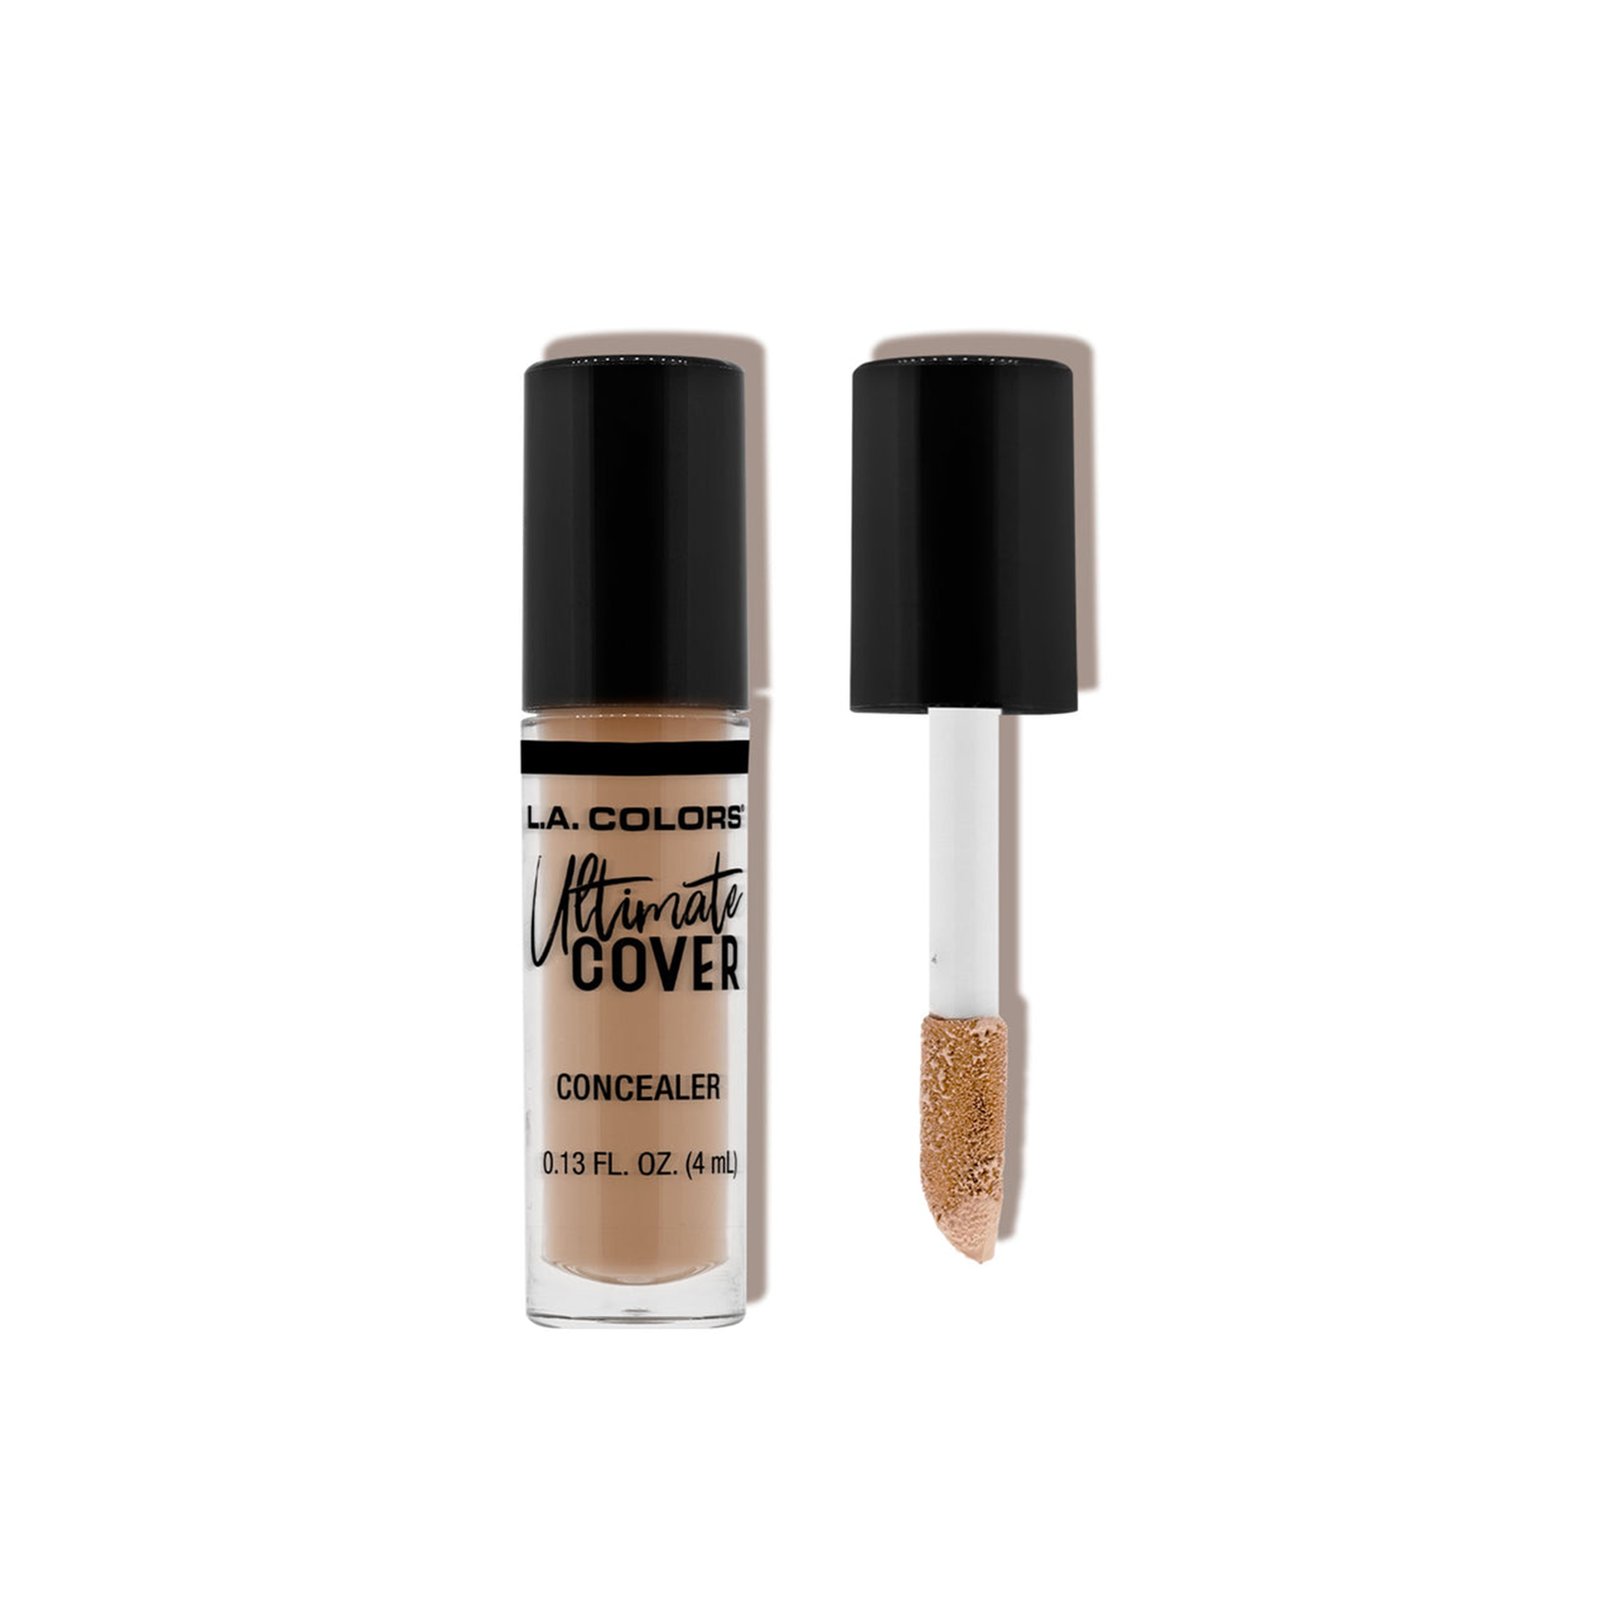 L.A. Colors Ultimate Cover Concealer CC907 Natural 4ml